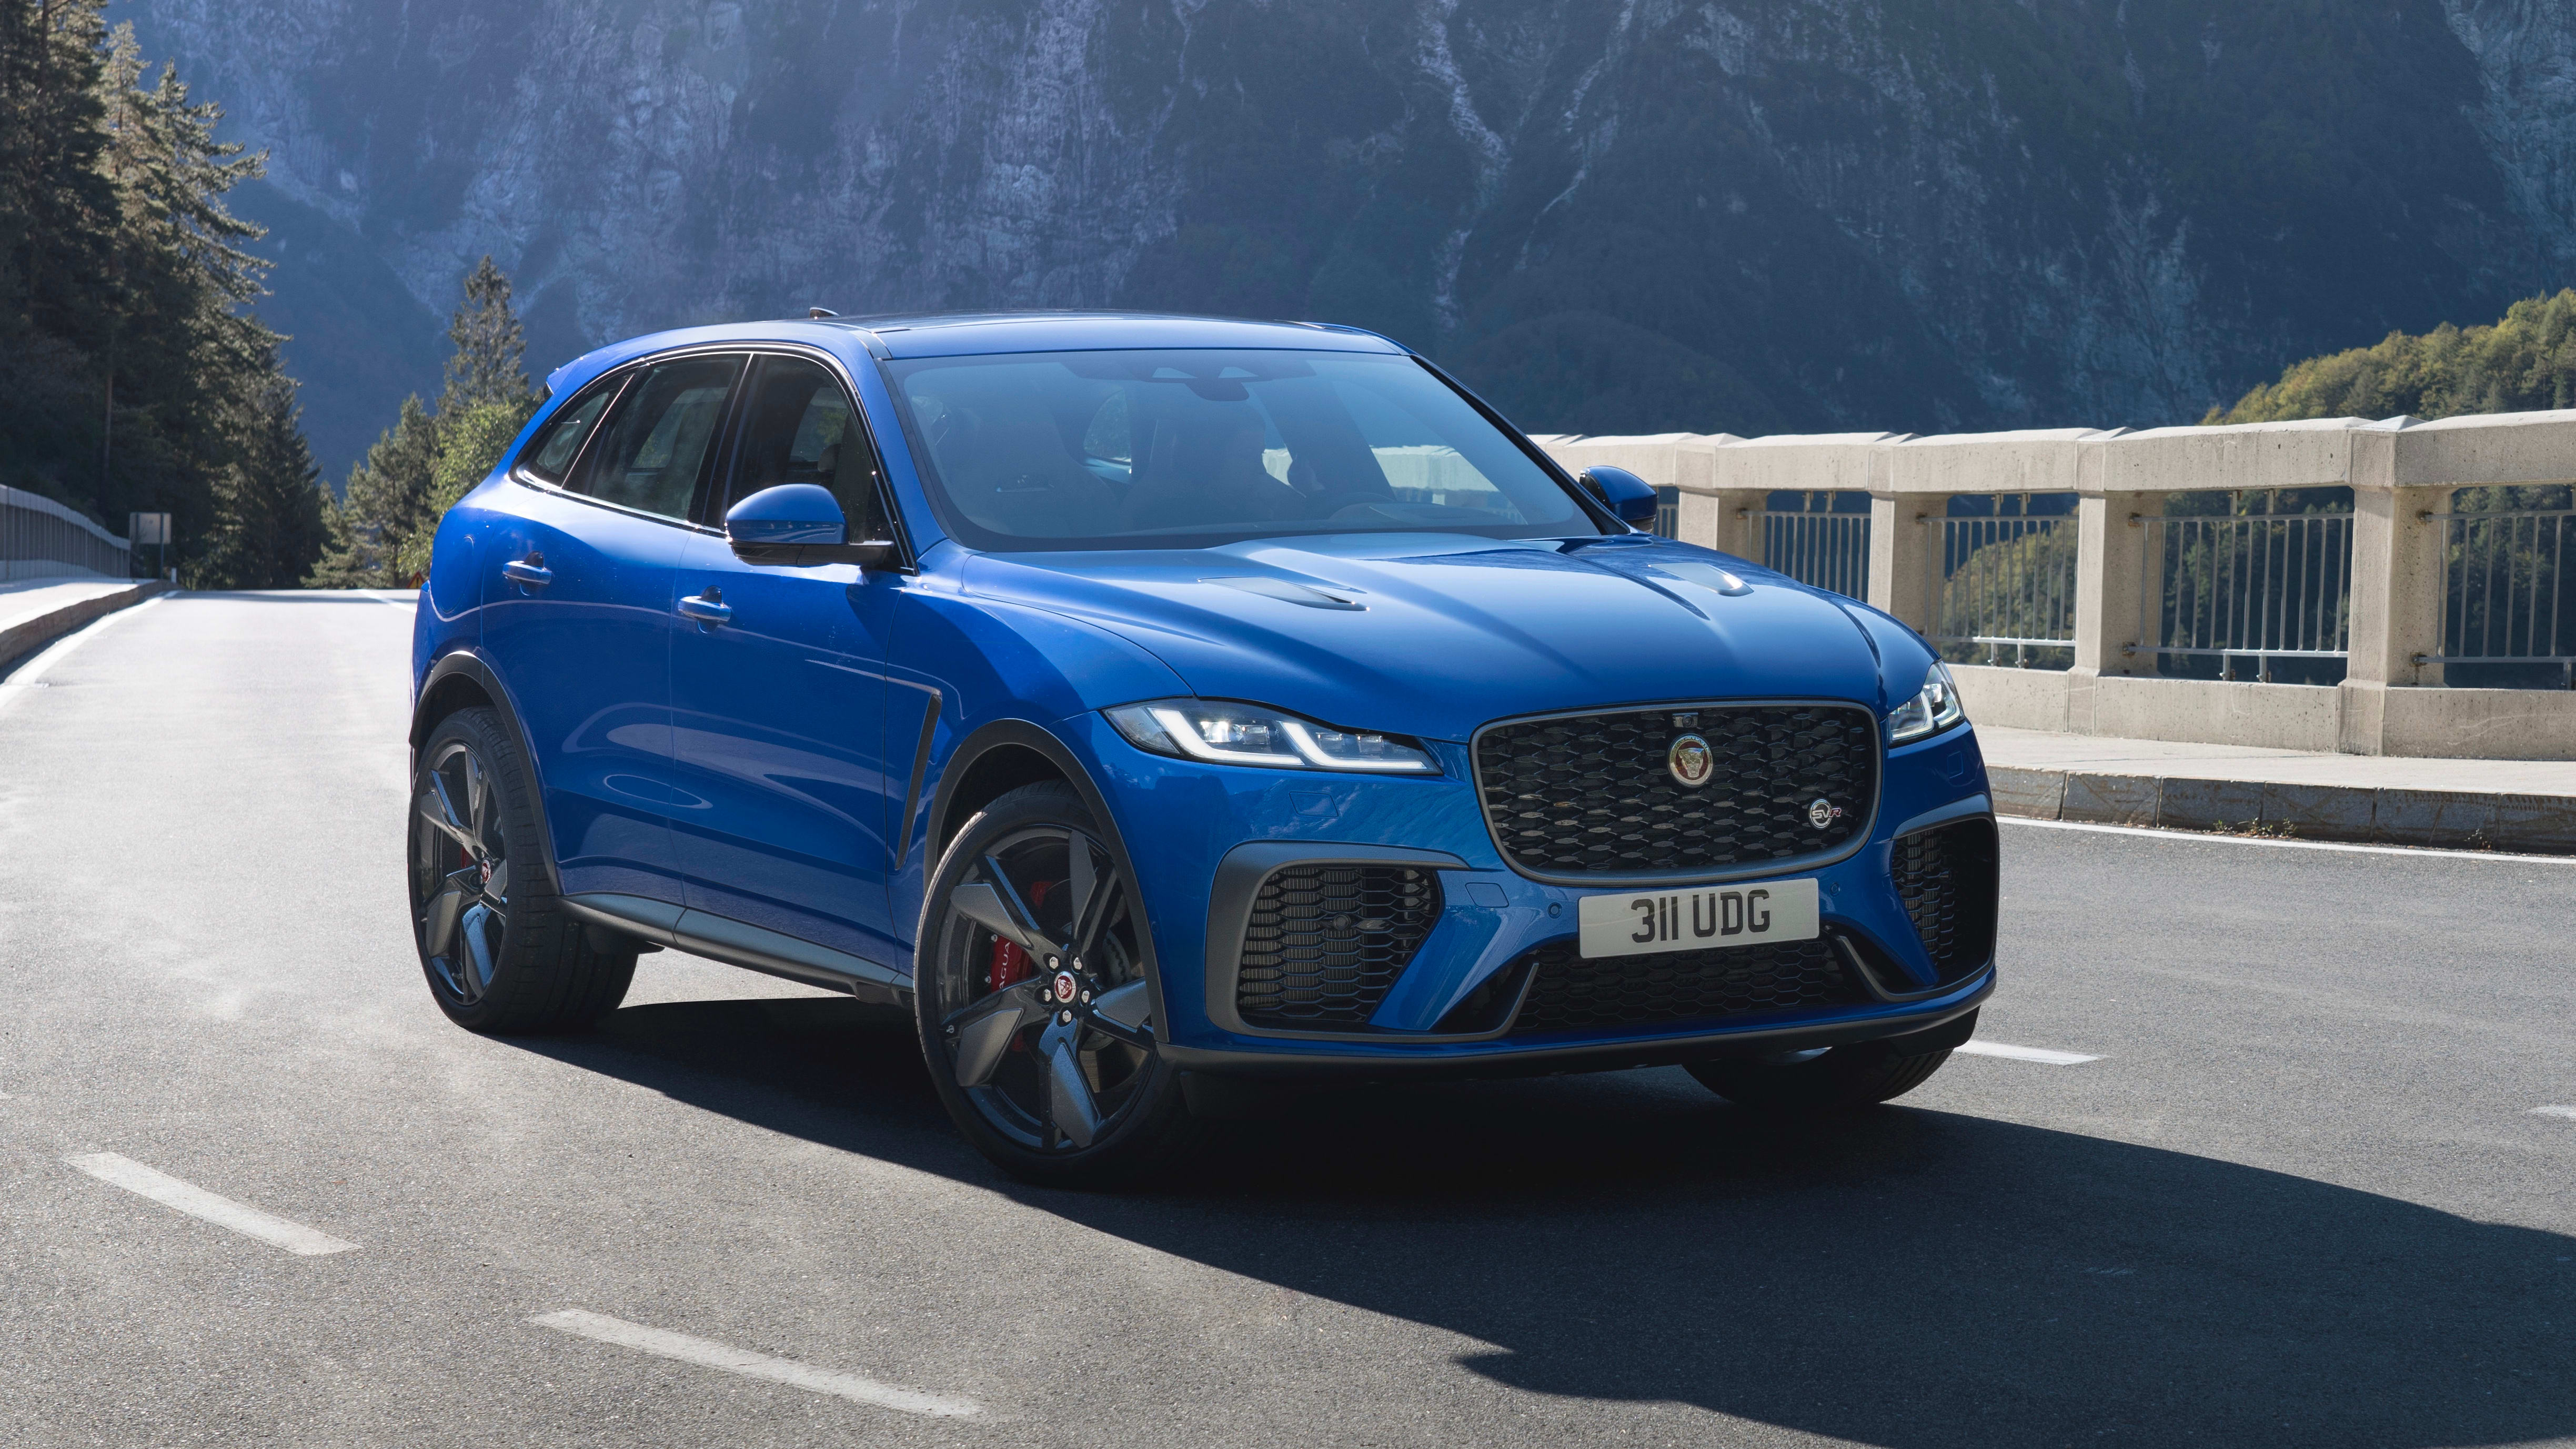 21 Jaguar F Pace Svr Price And Specs High Performance Suv Updated Caradvice